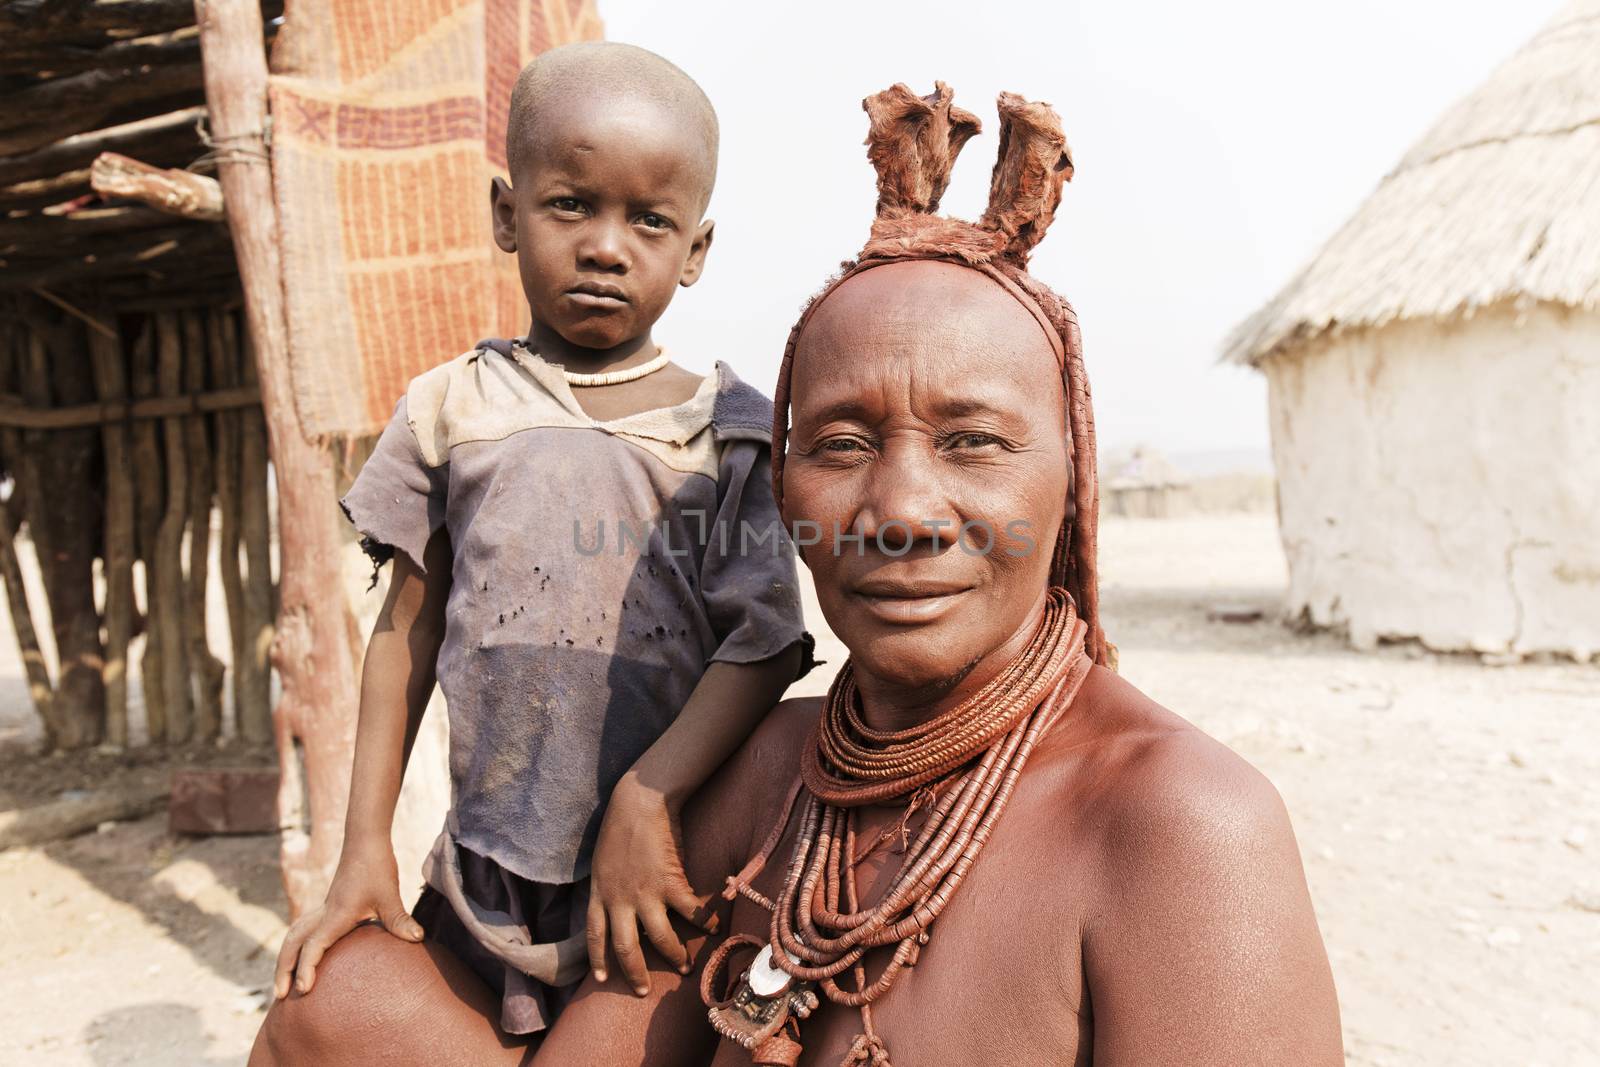 Himba woman with her small son smiling to the camera in the village of Himba people